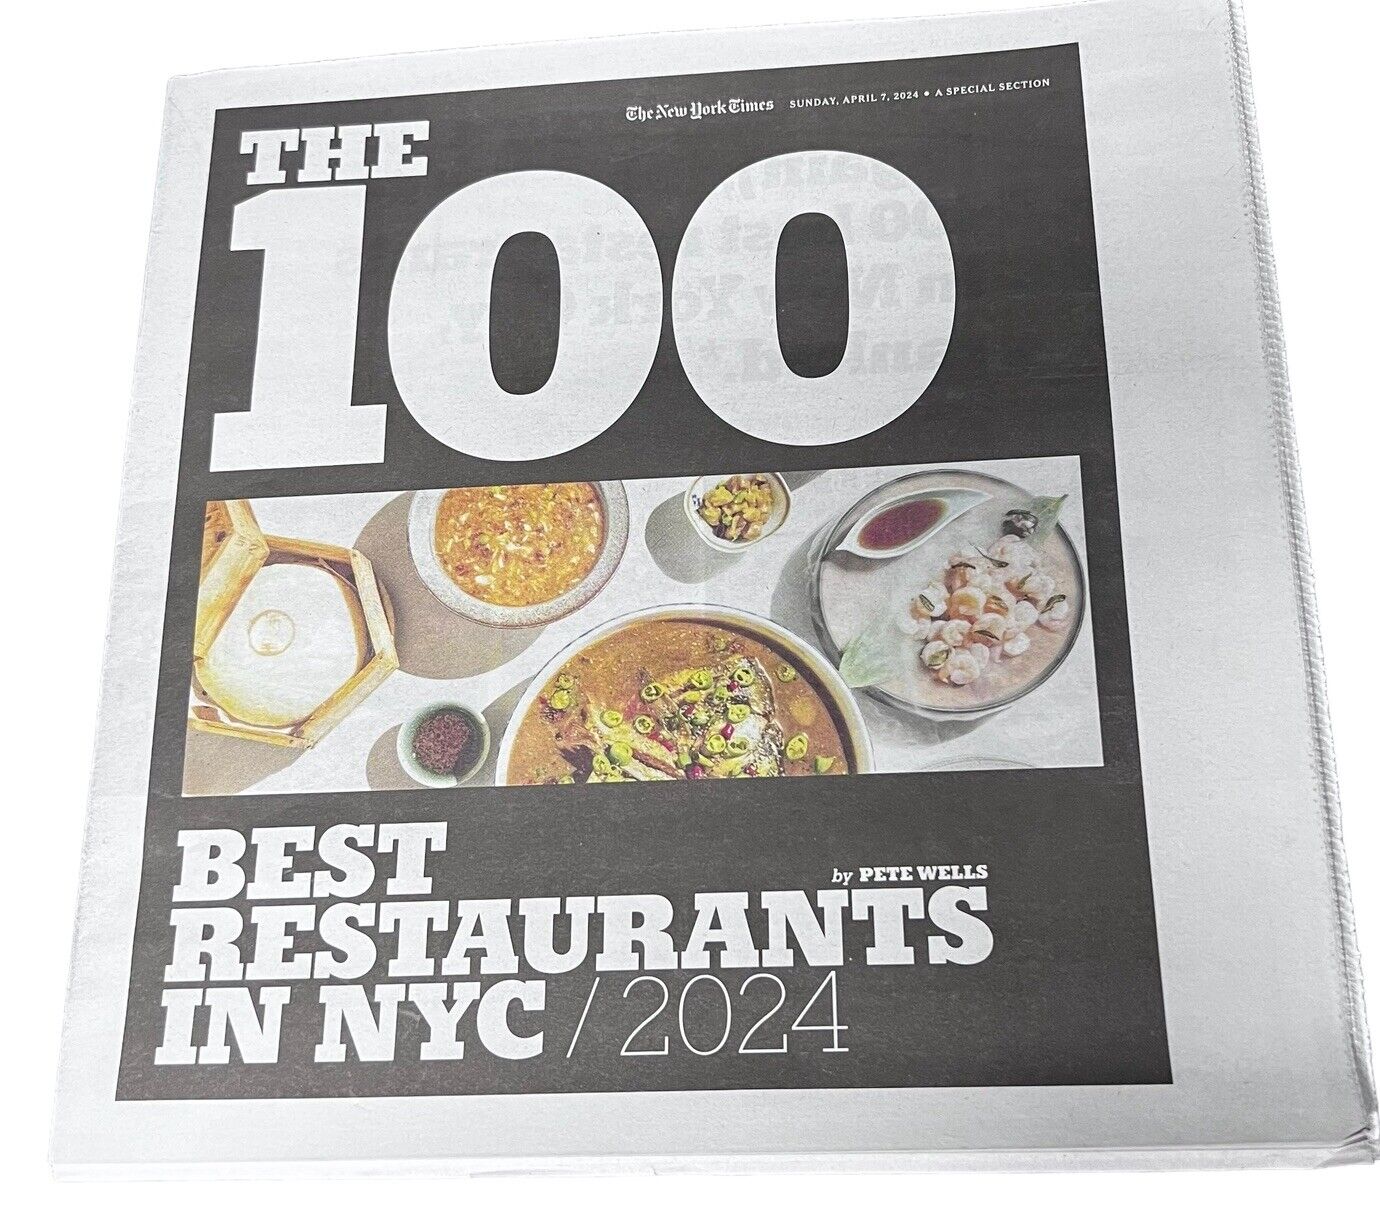 The 100 Best Restaurants in NYC 2024 New York Times Special Section April 7 2024